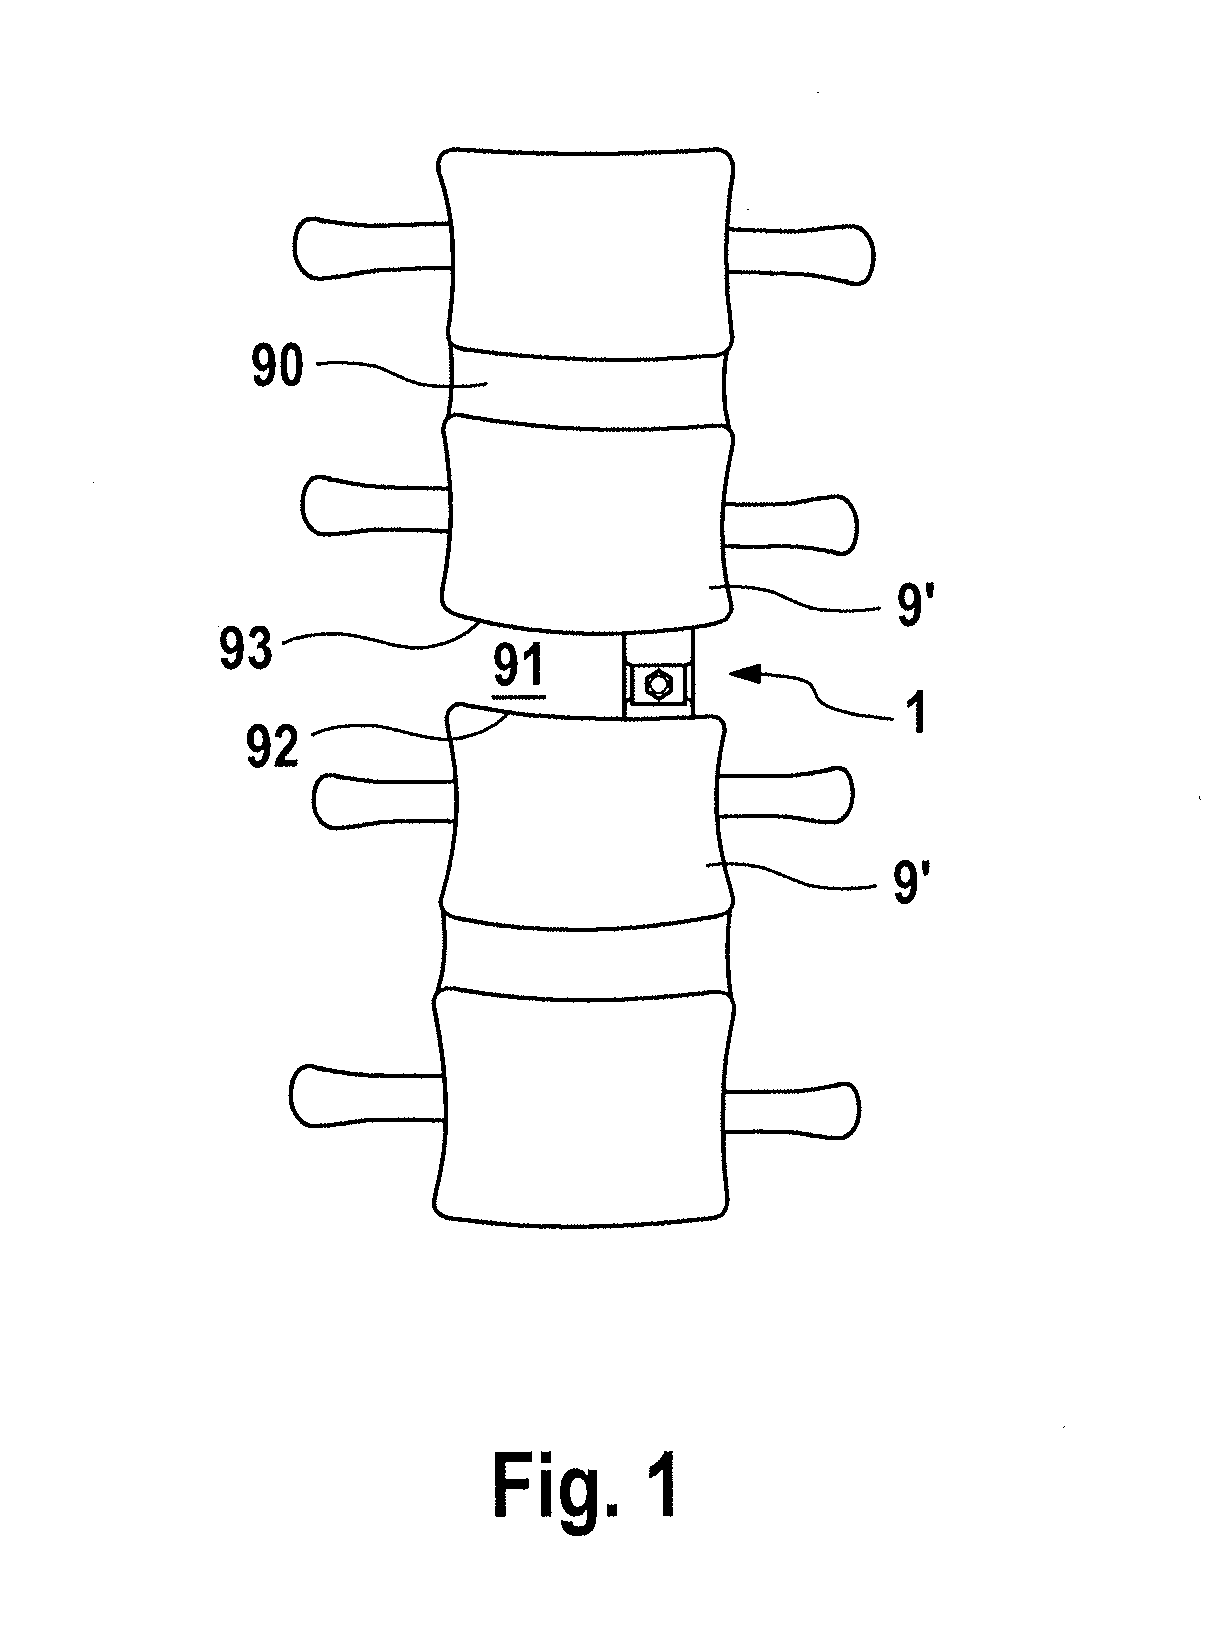 Continuously height-adjustable intervertebral fusion implant